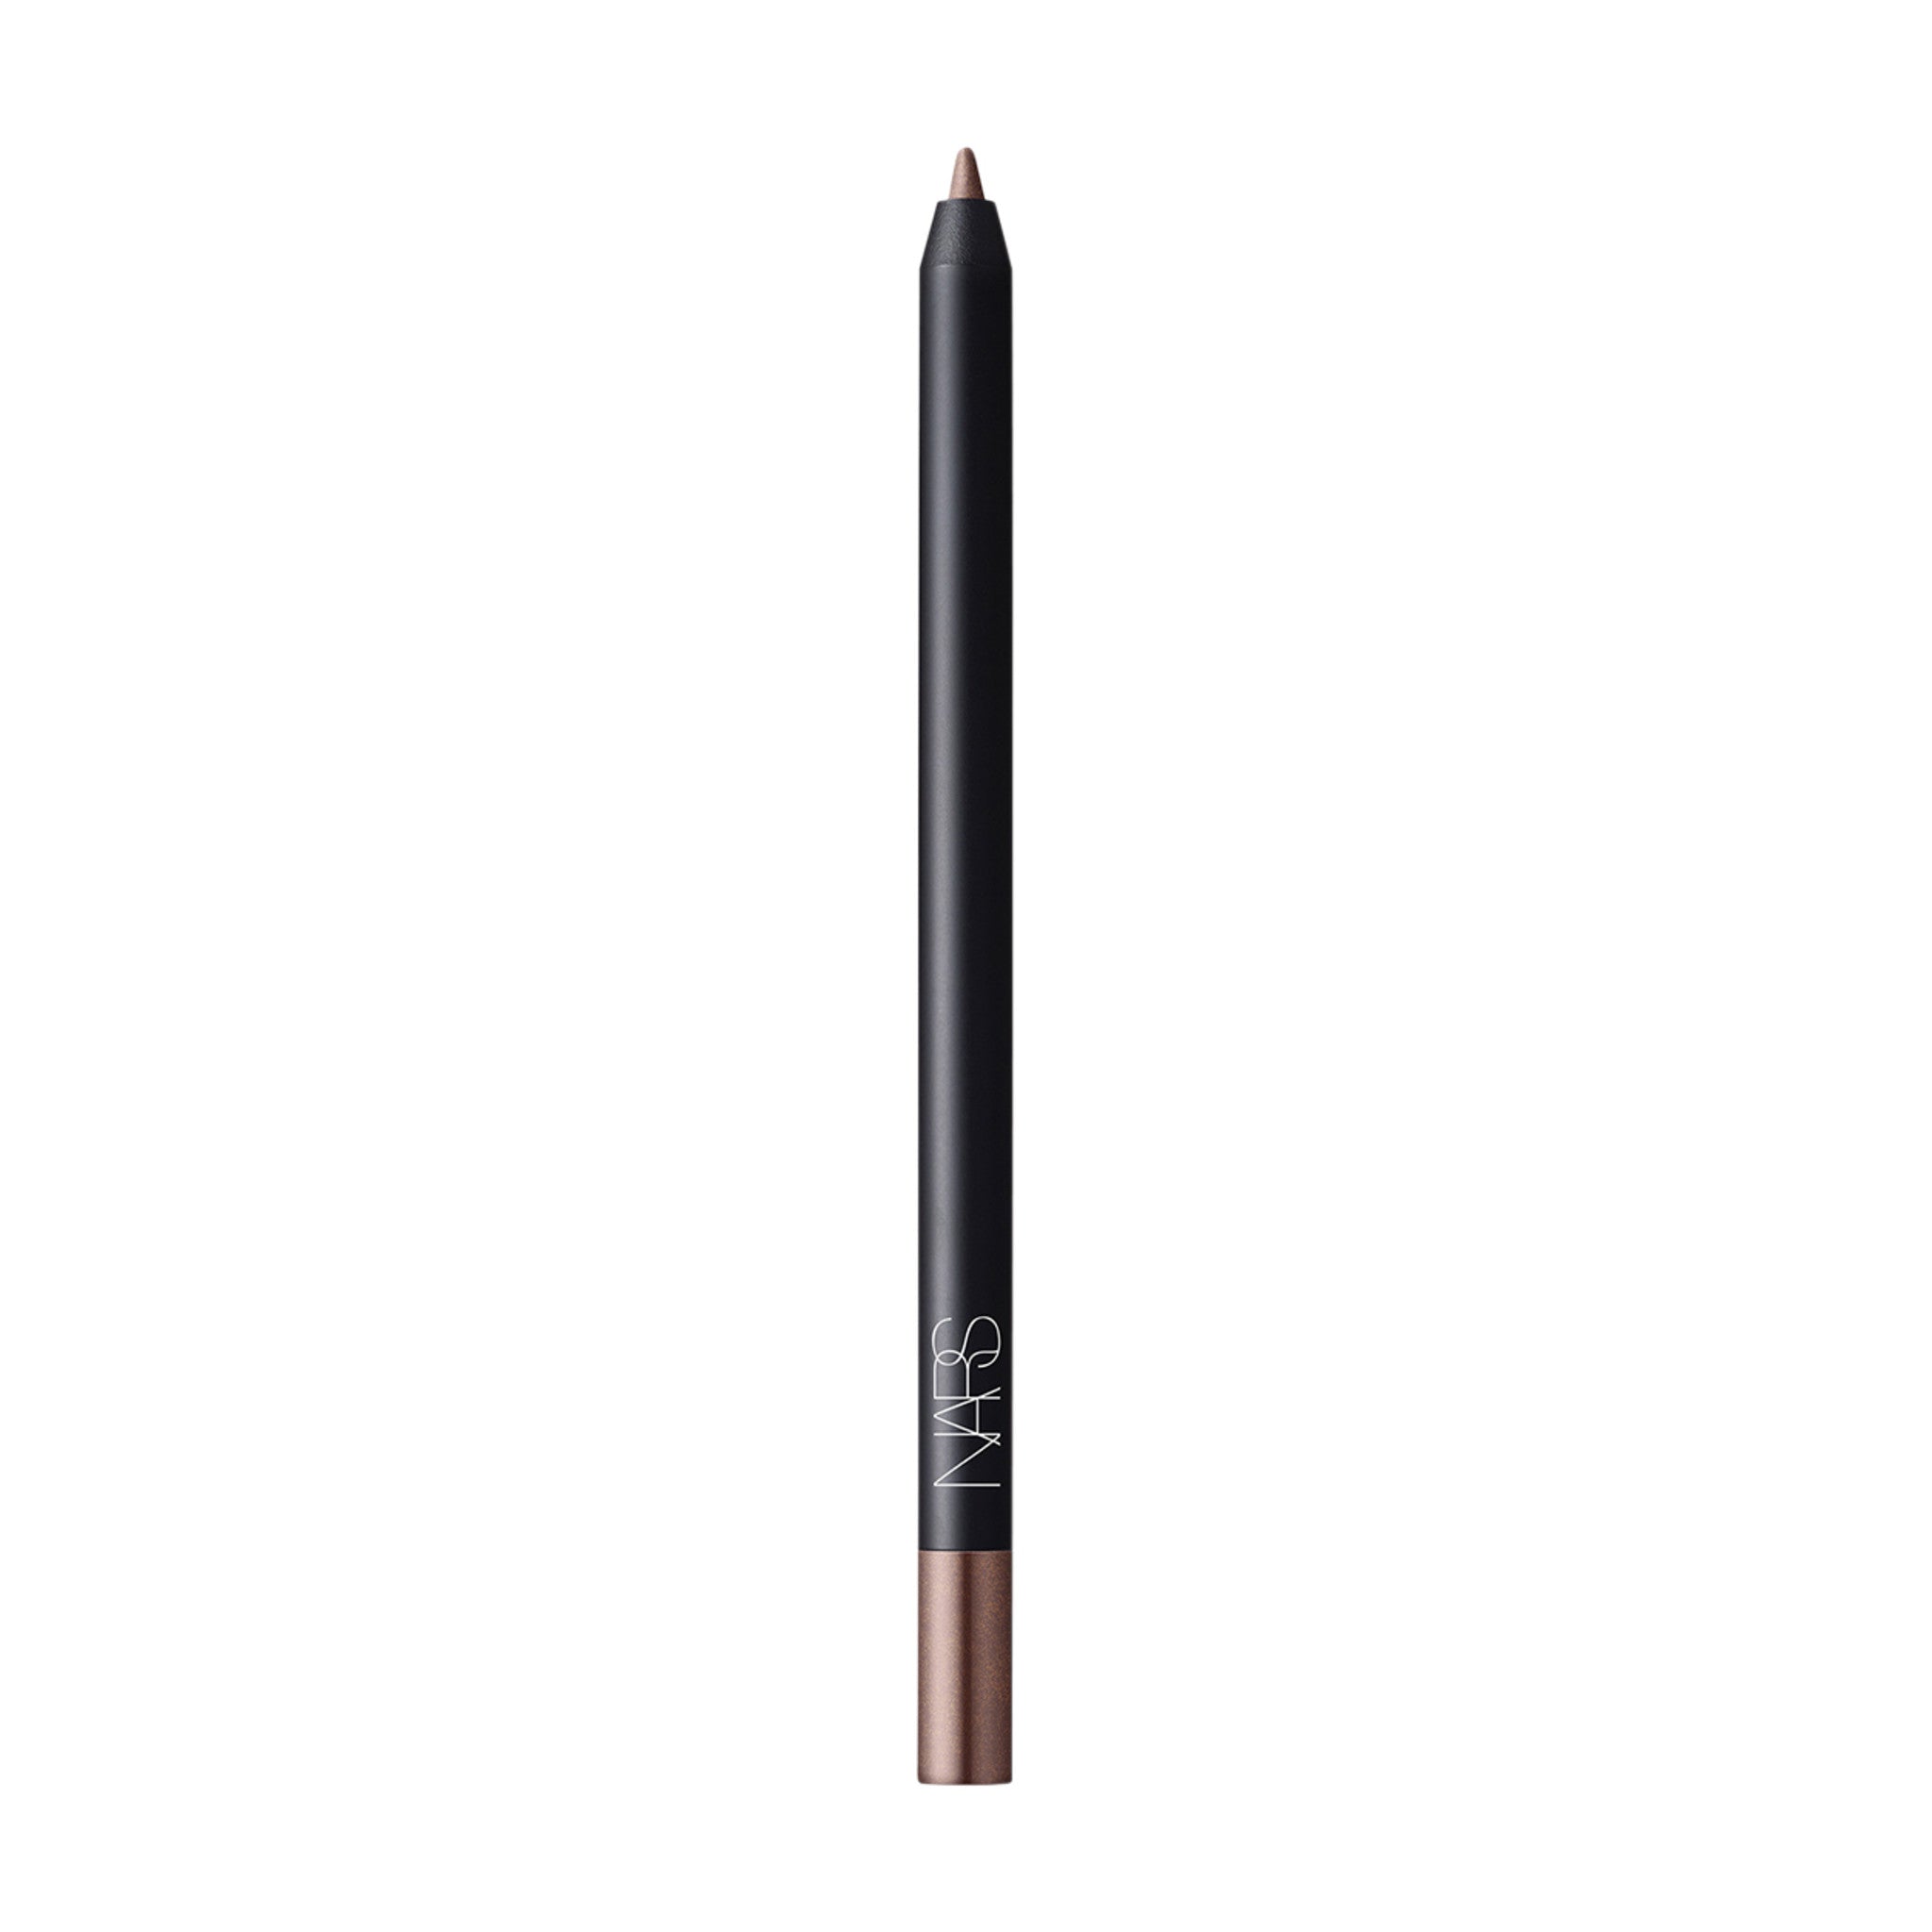 Nars High-Pigment Longwear Eyeliner Color/Shade variant: Mulholland Drive main image. This product is in the color nude